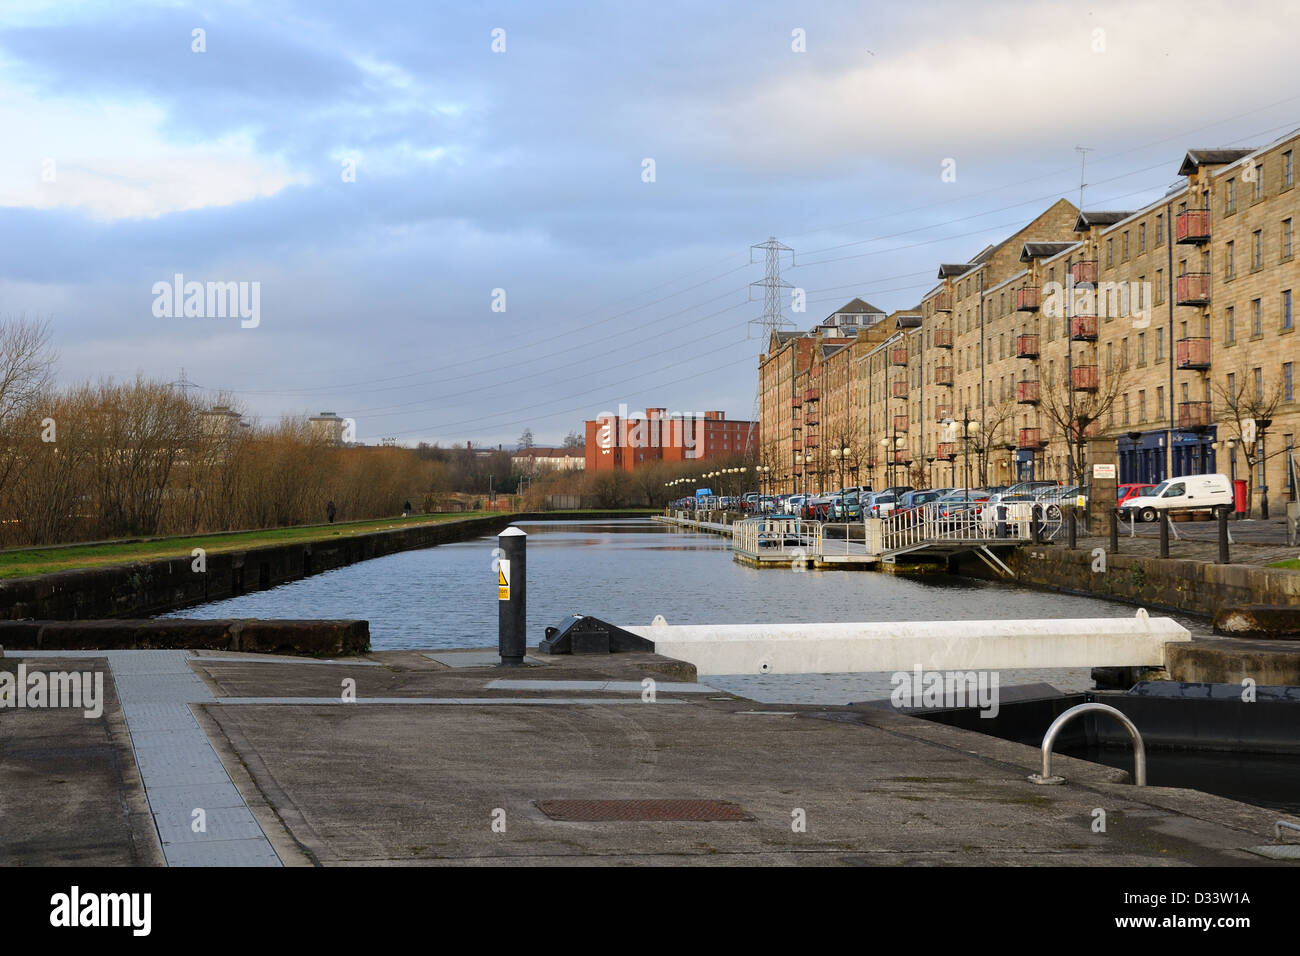 Forth and Clyde canal lock system at Speirs Wharf, Glasgow, Scotland, UK, Europe Stock Photo